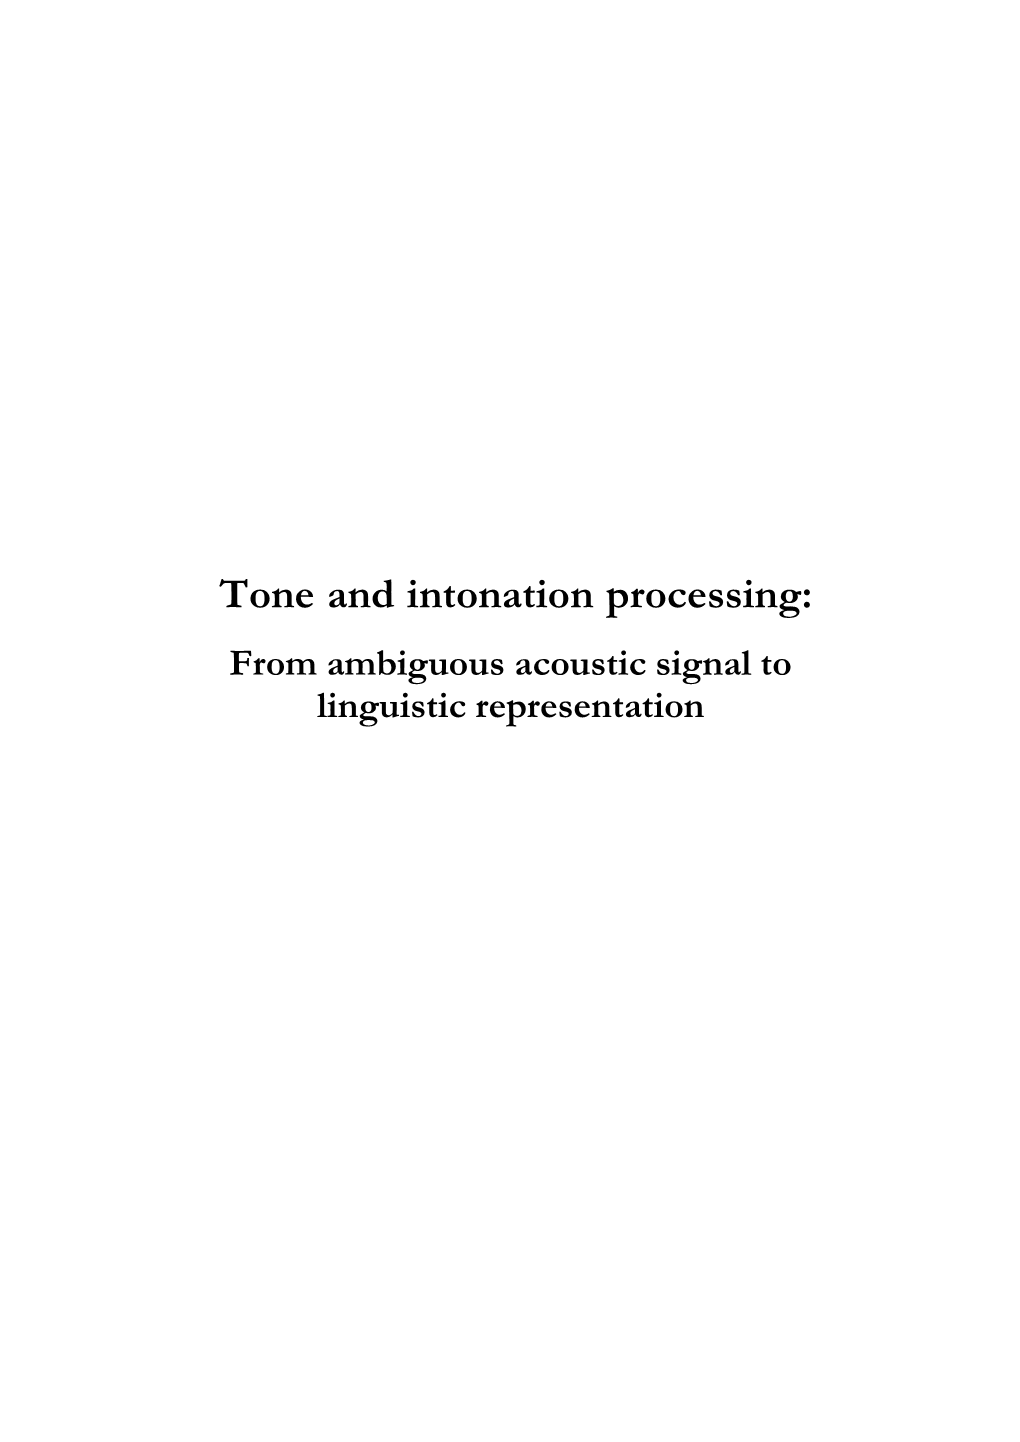 Tone and Intonation Processing: from Ambiguous Acoustic Signal to Linguistic Representation